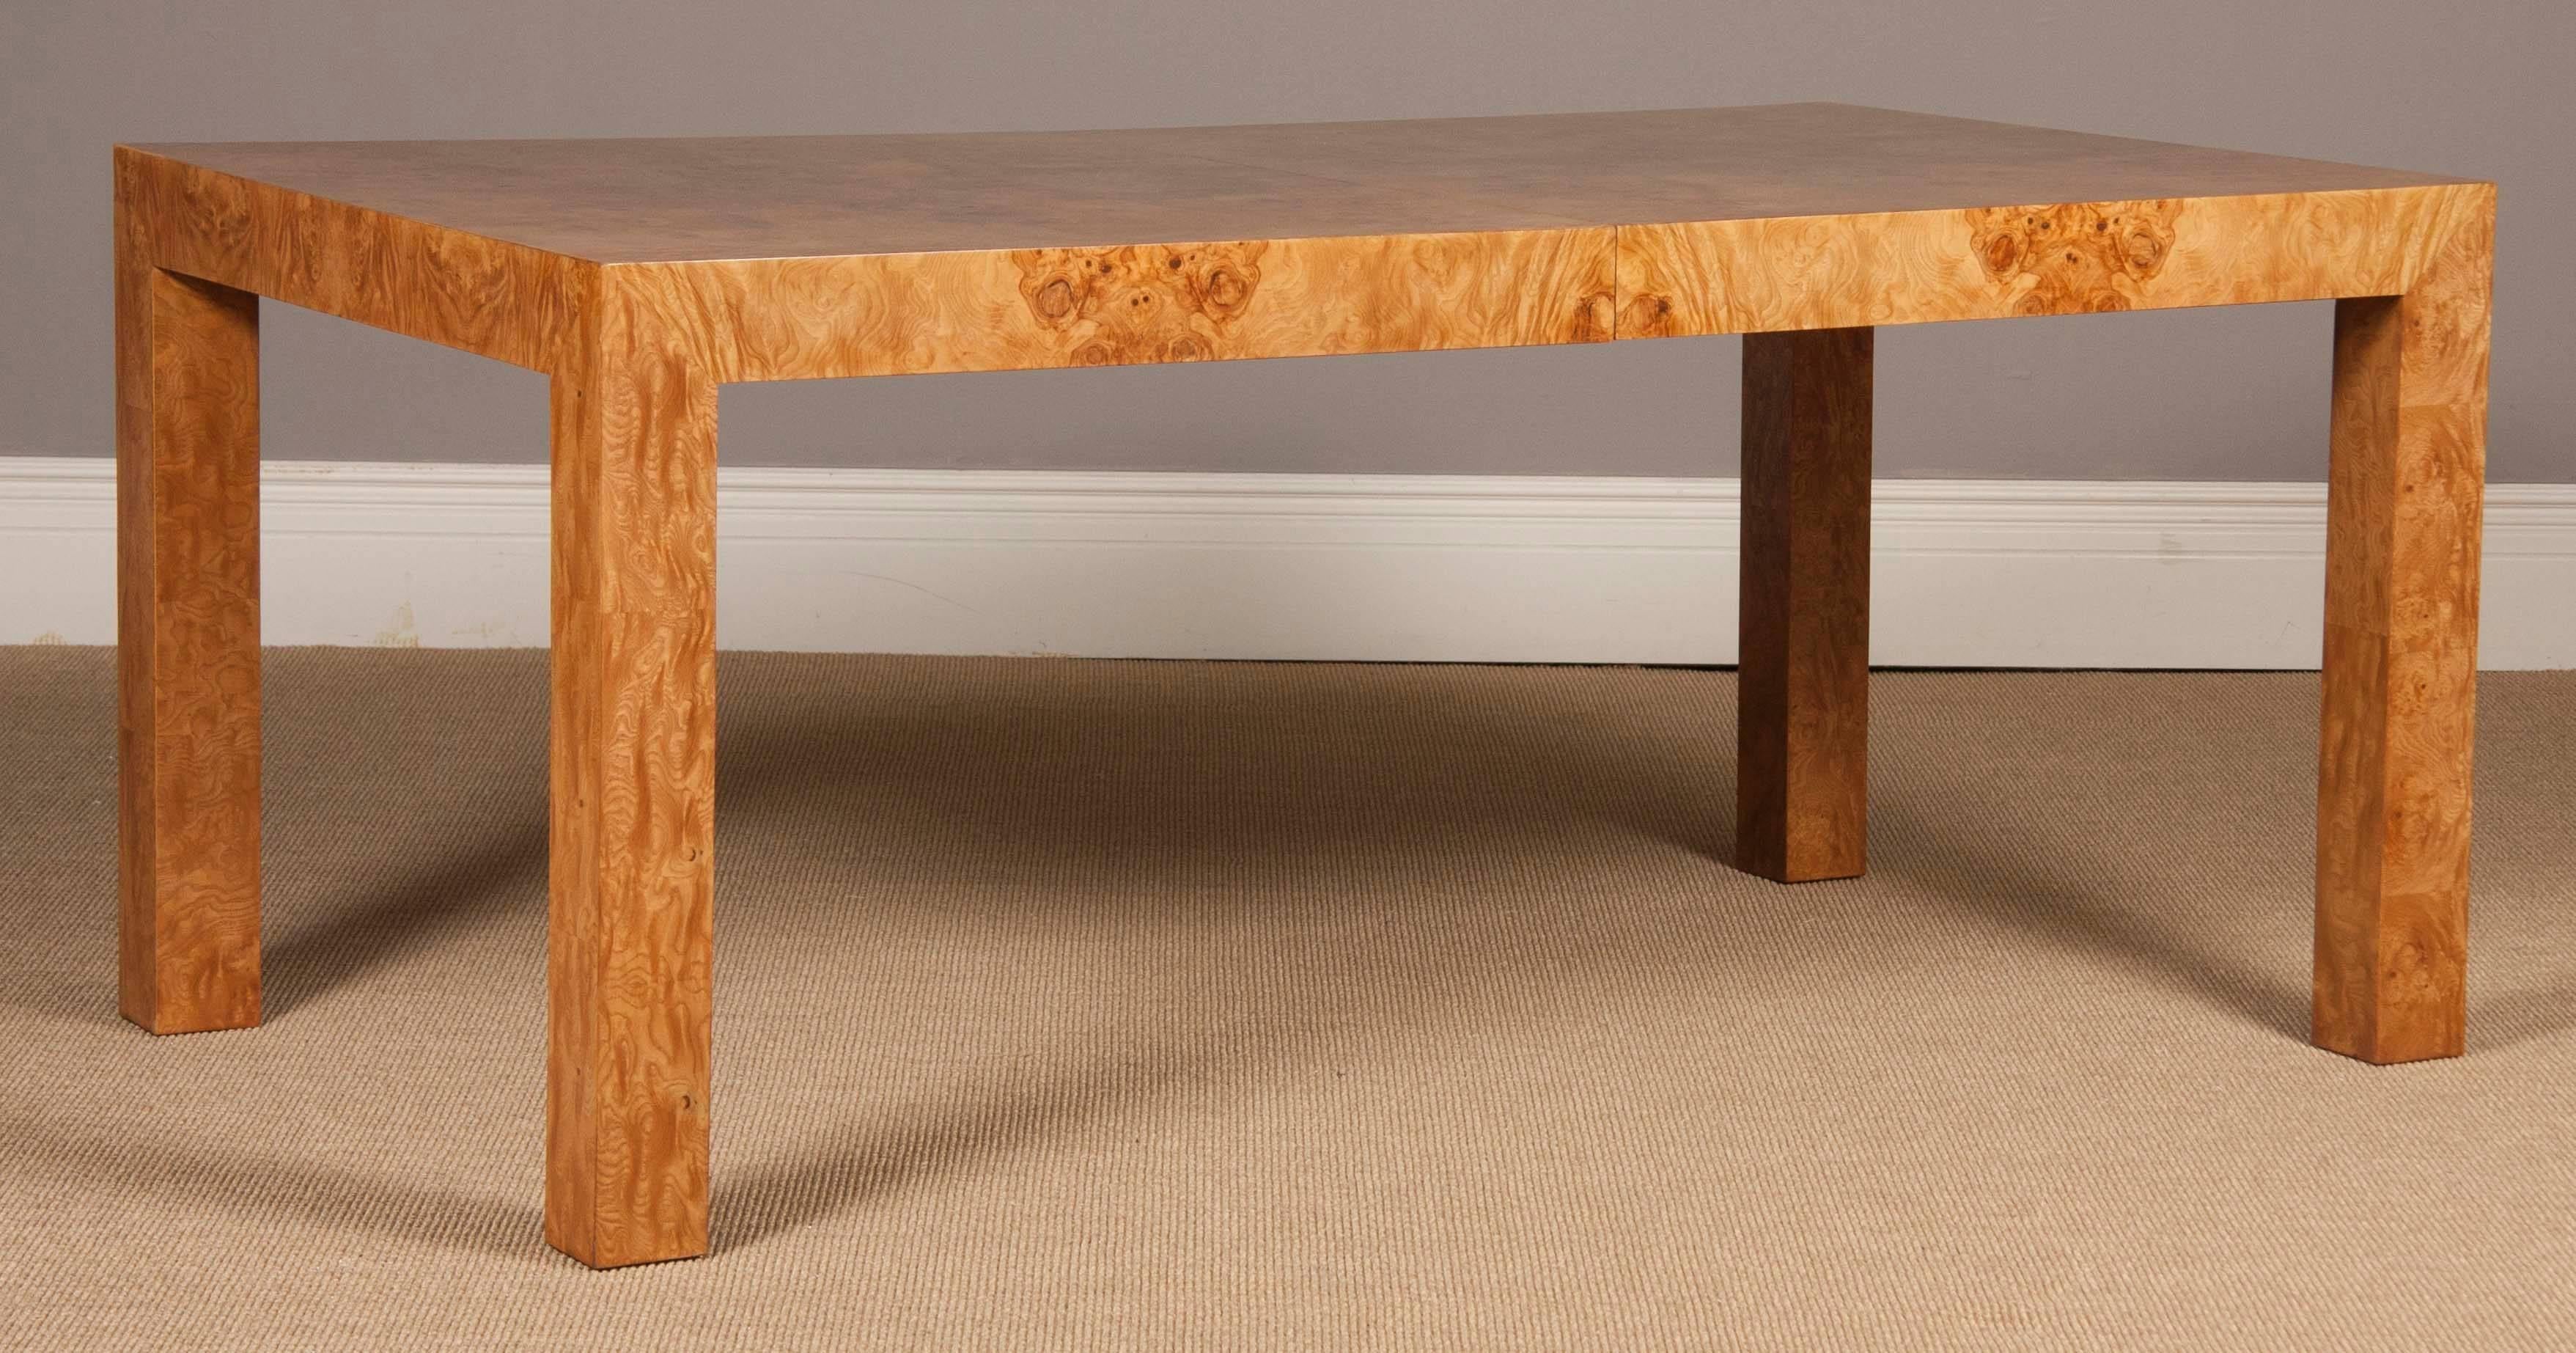 A Parsons style olivewood dining table designed by Milo Baughman. The table has 22